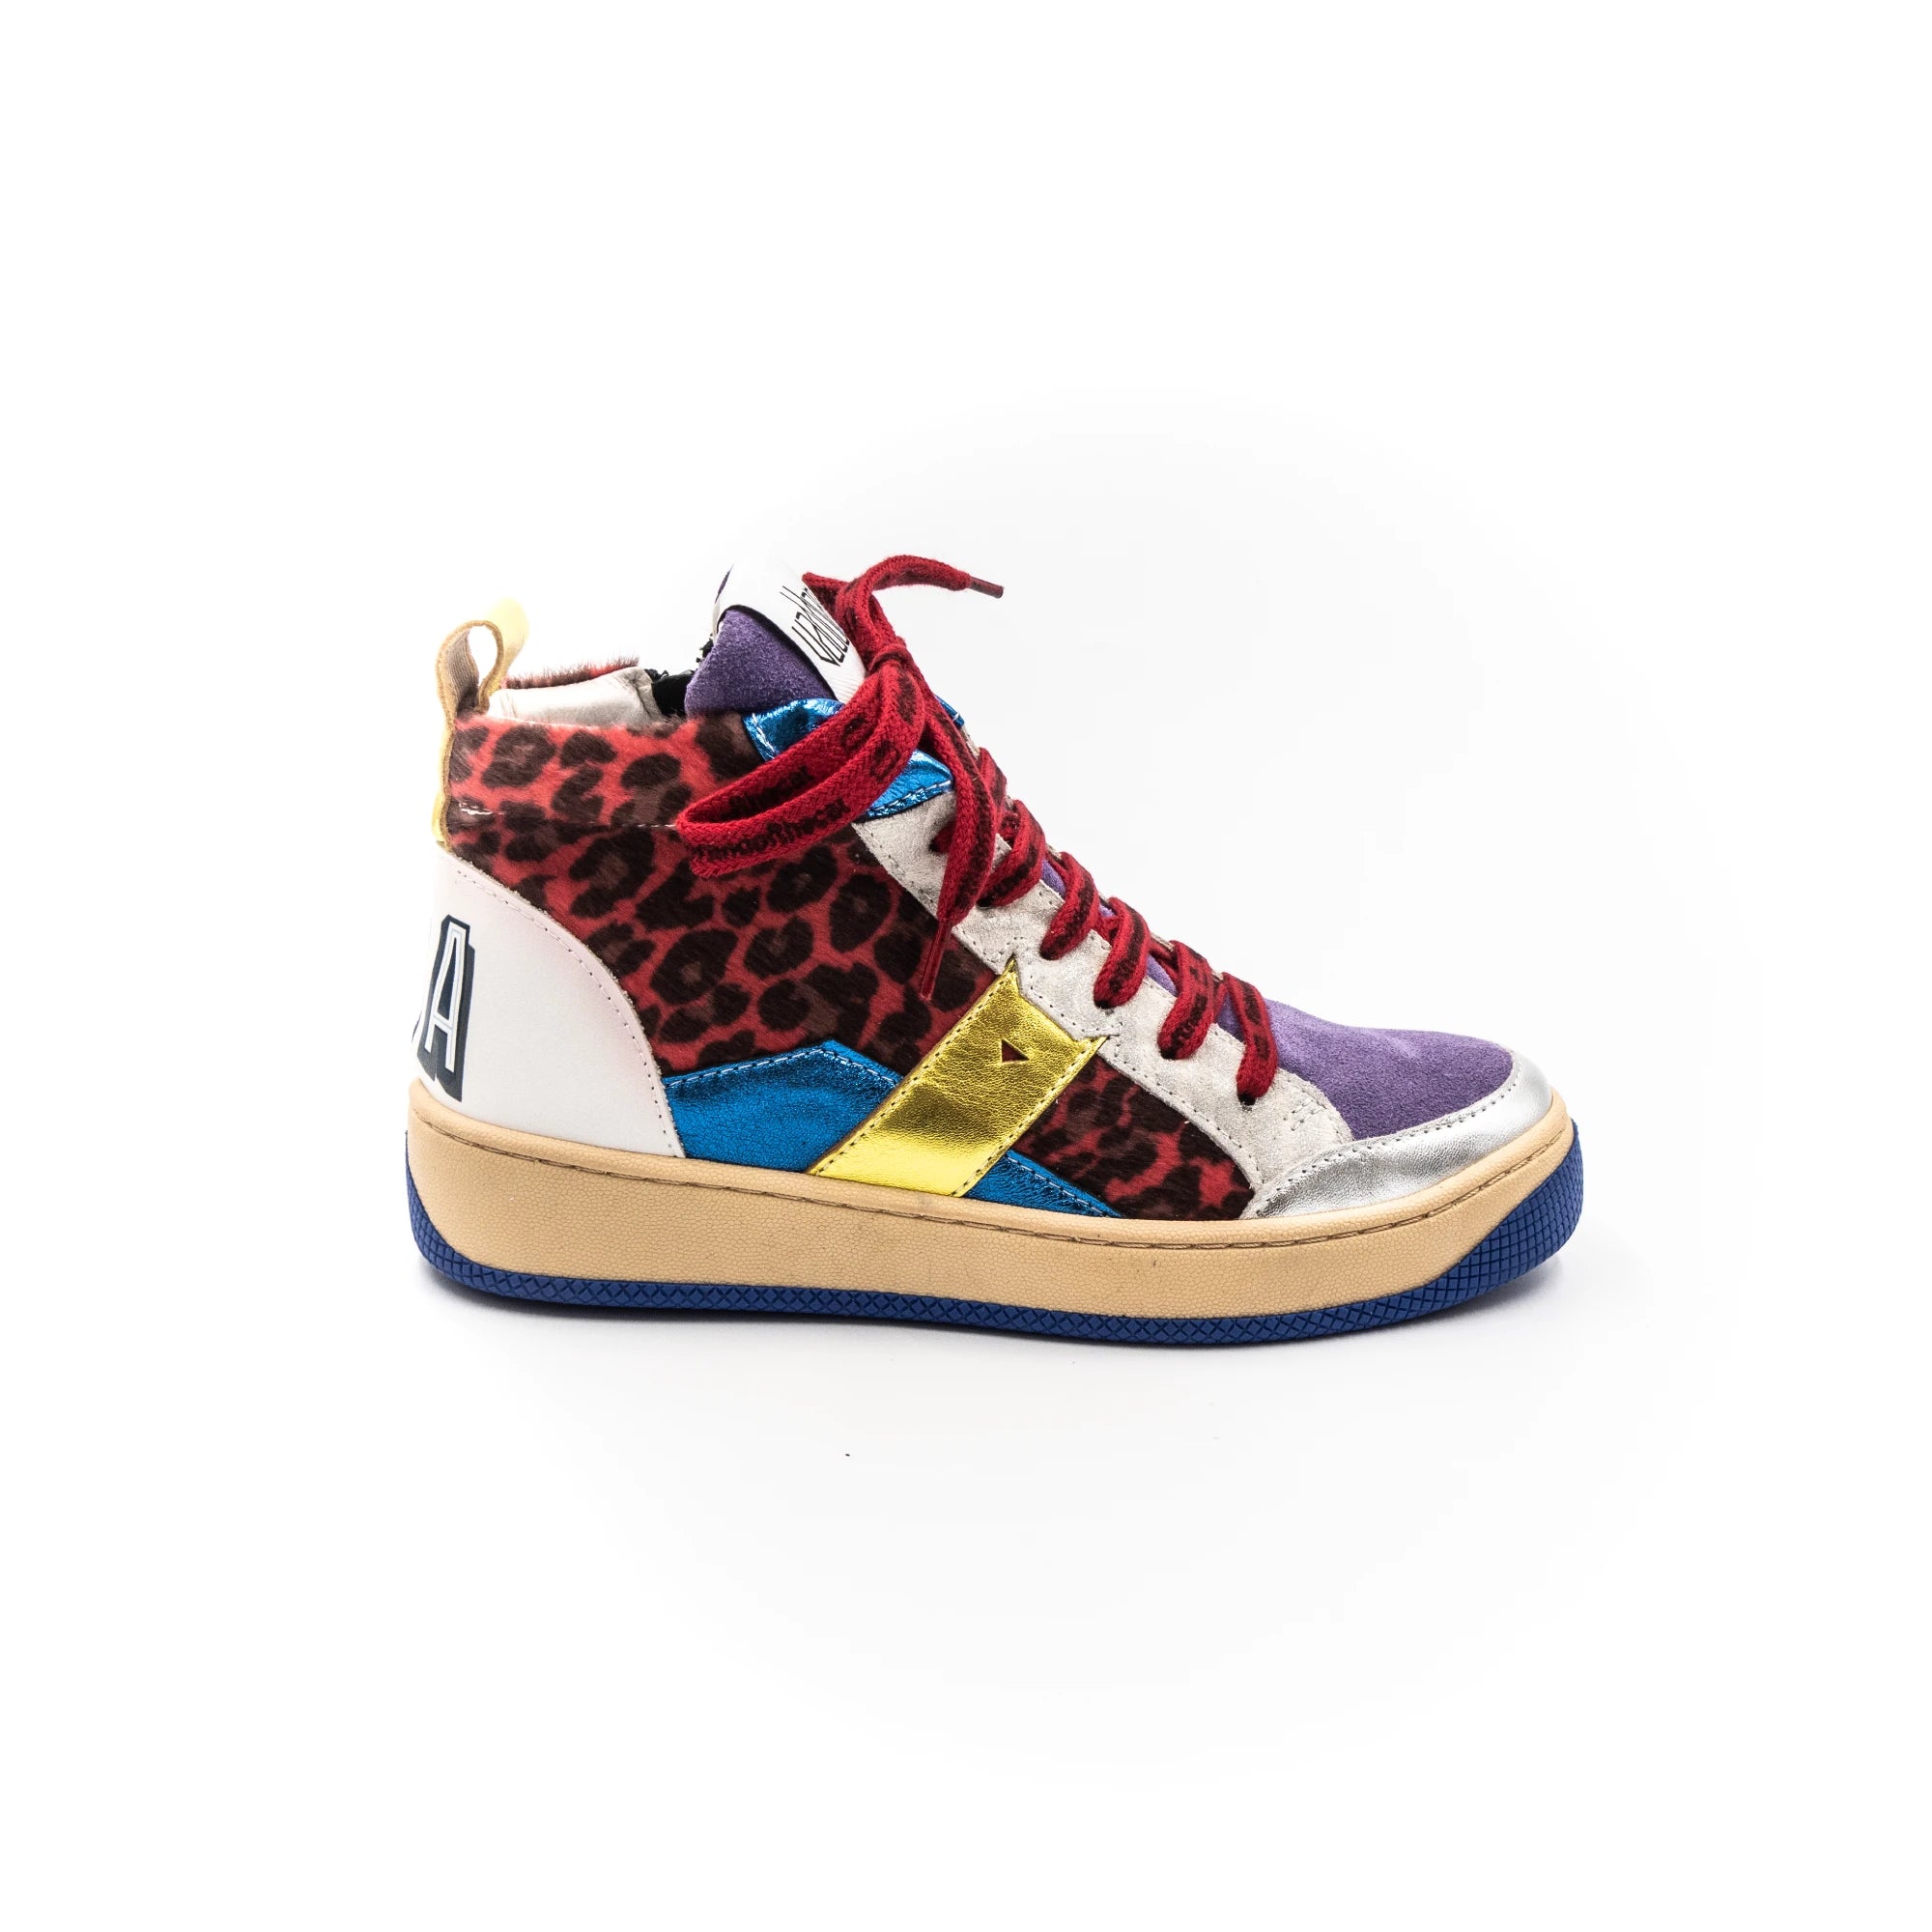 High-top sneakers in different colors.